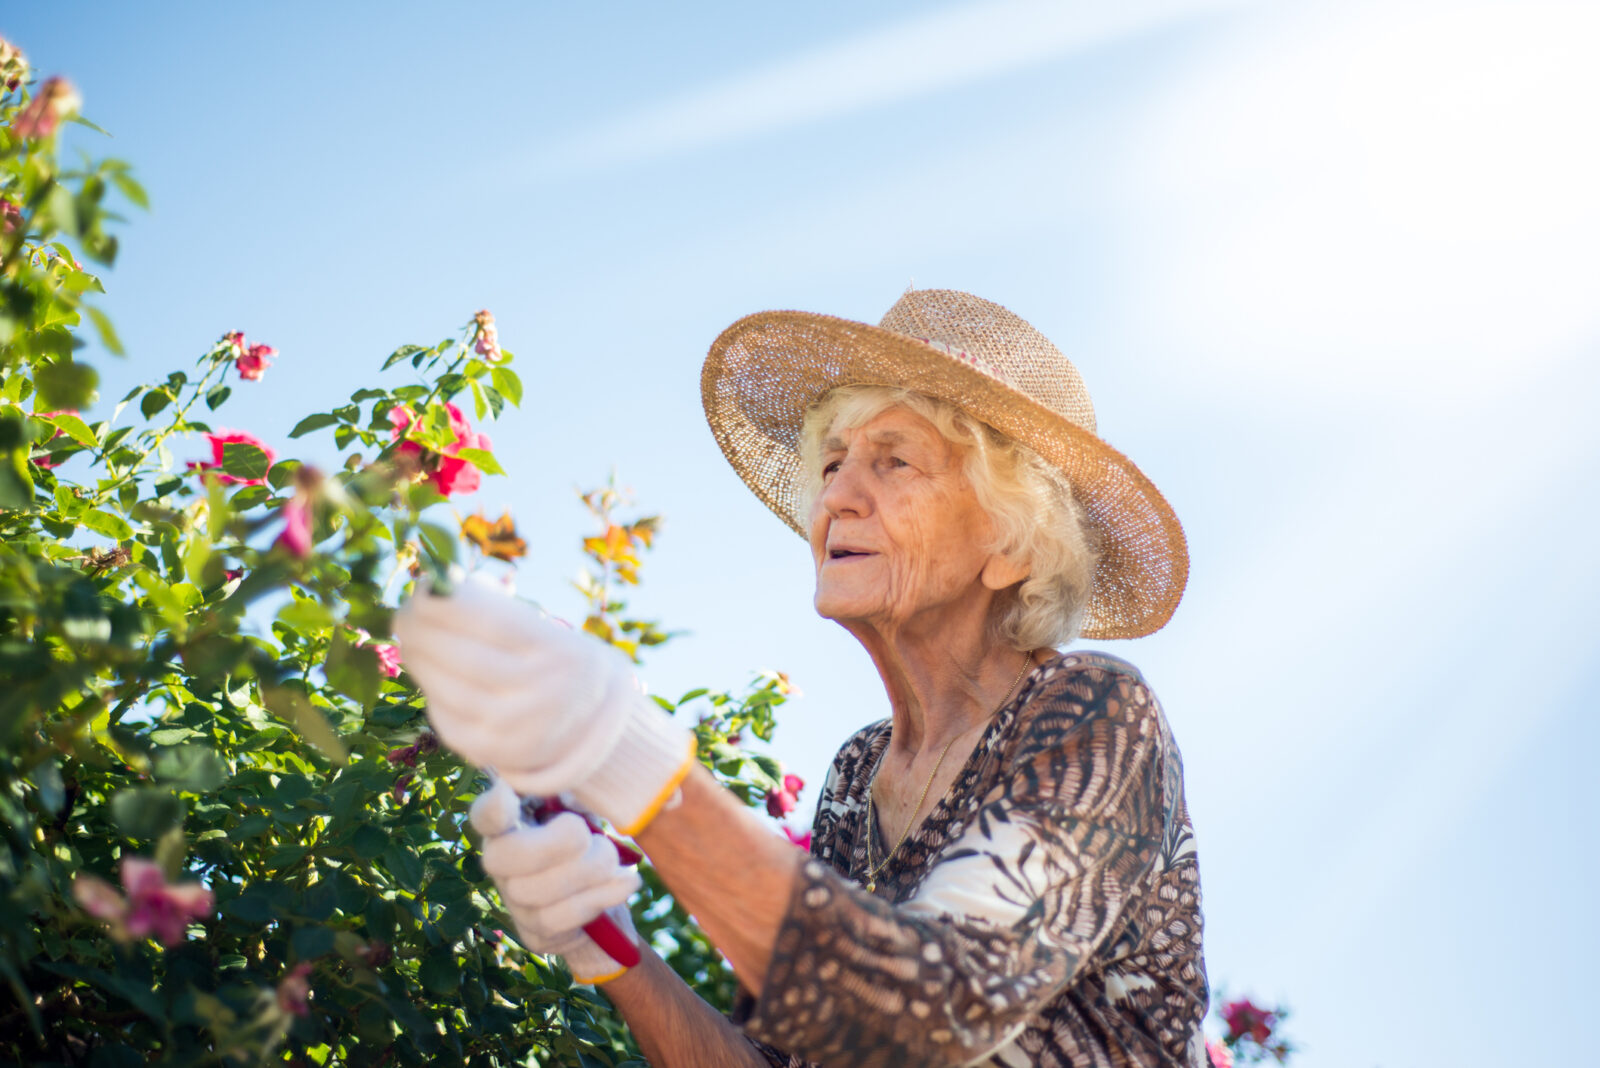 A senior woman tends to her roses in her garden; she wears a broad-brimmed hat on this sunny day.